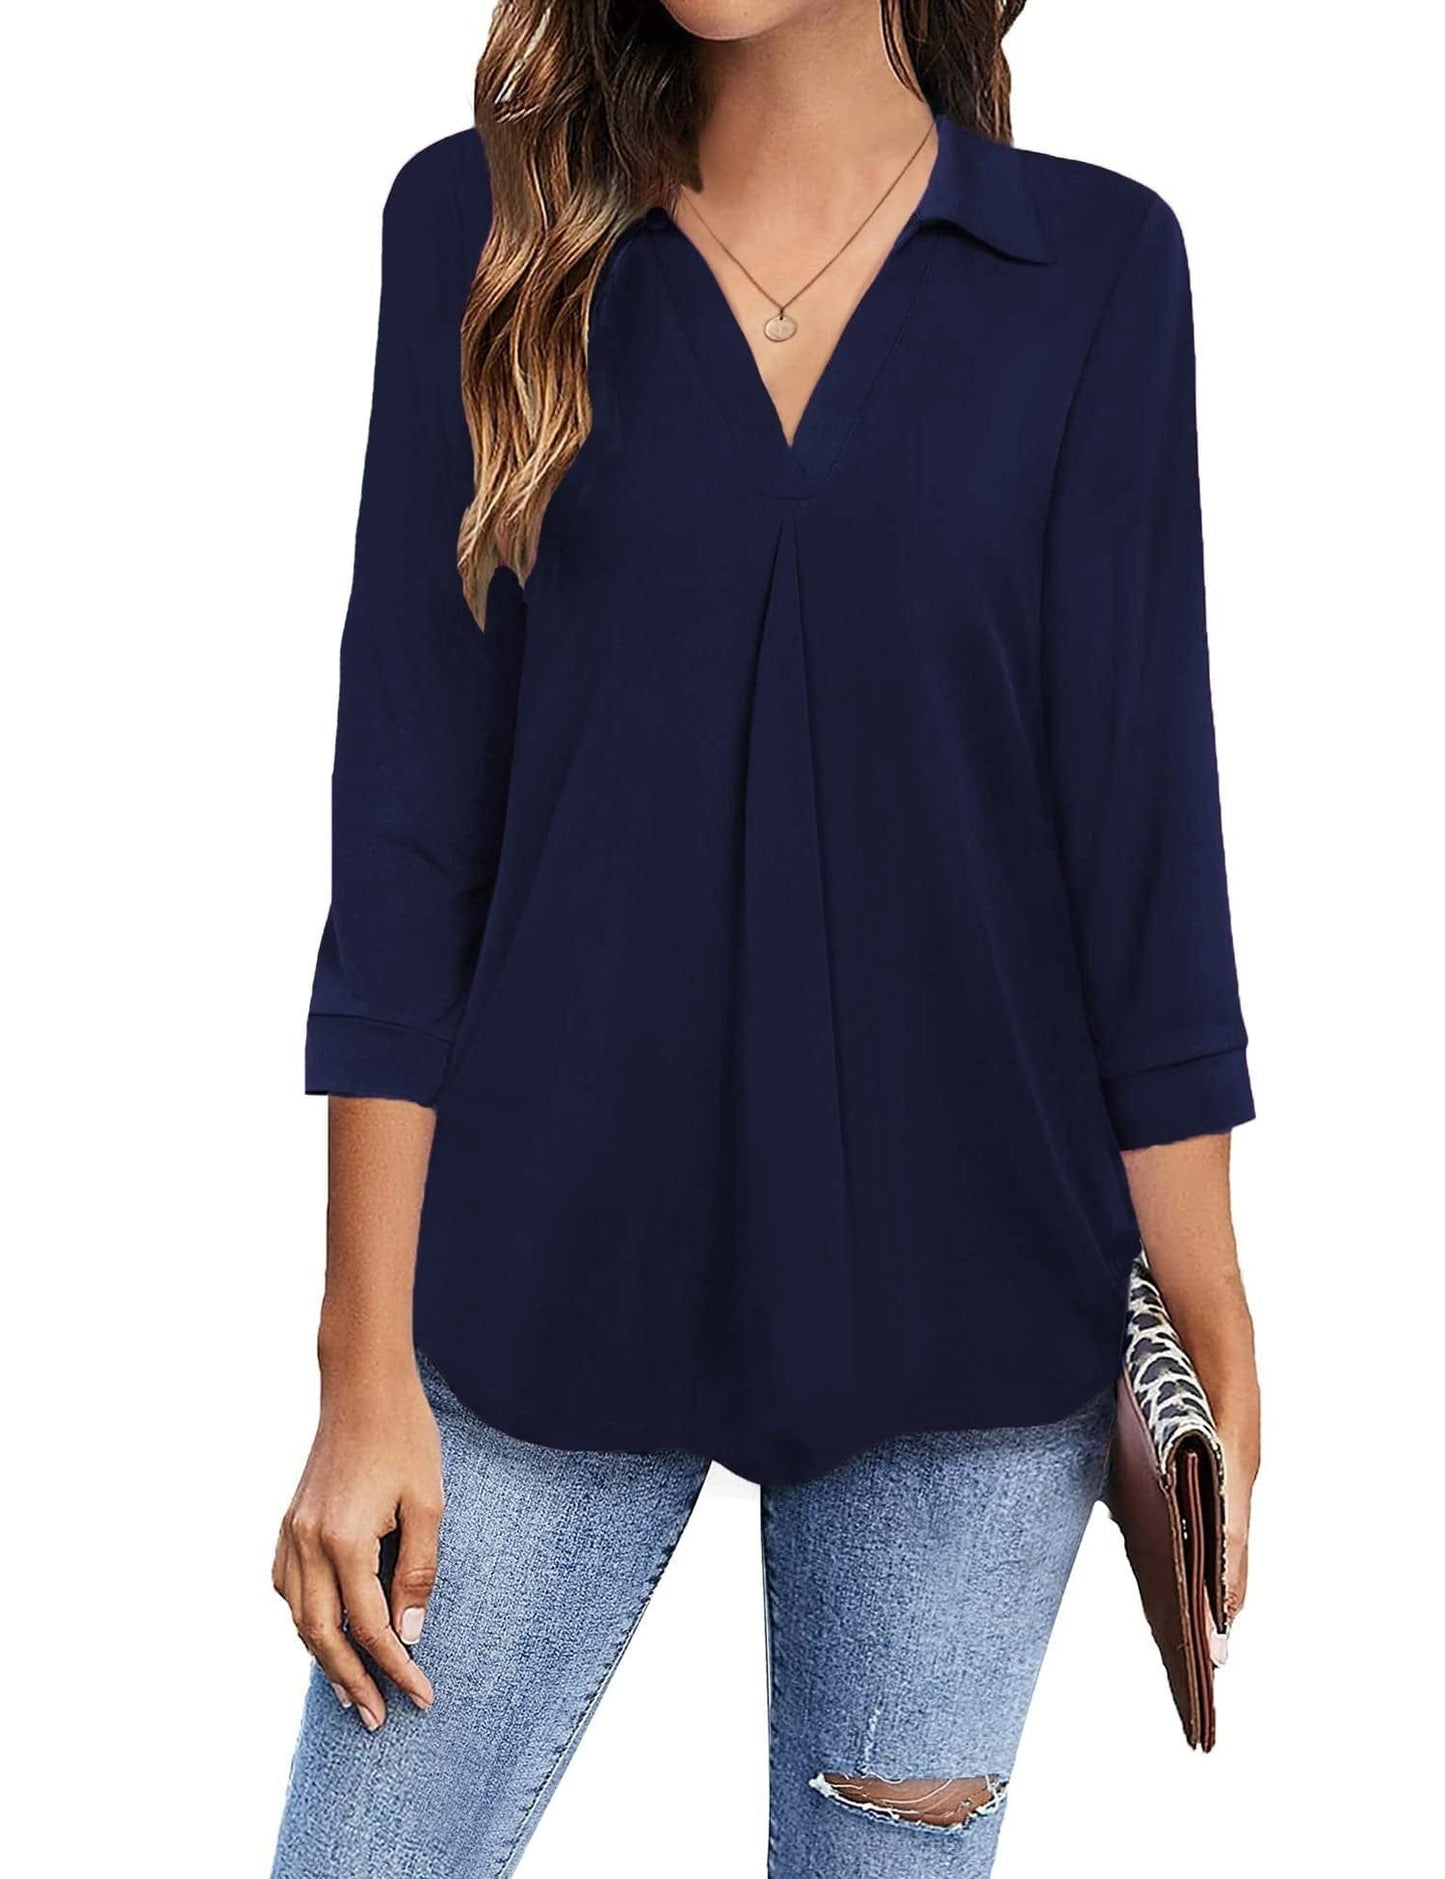 Collared V Neck Casual Loose Blouse BLO2211191918NBLUS Navy / 2 (S)